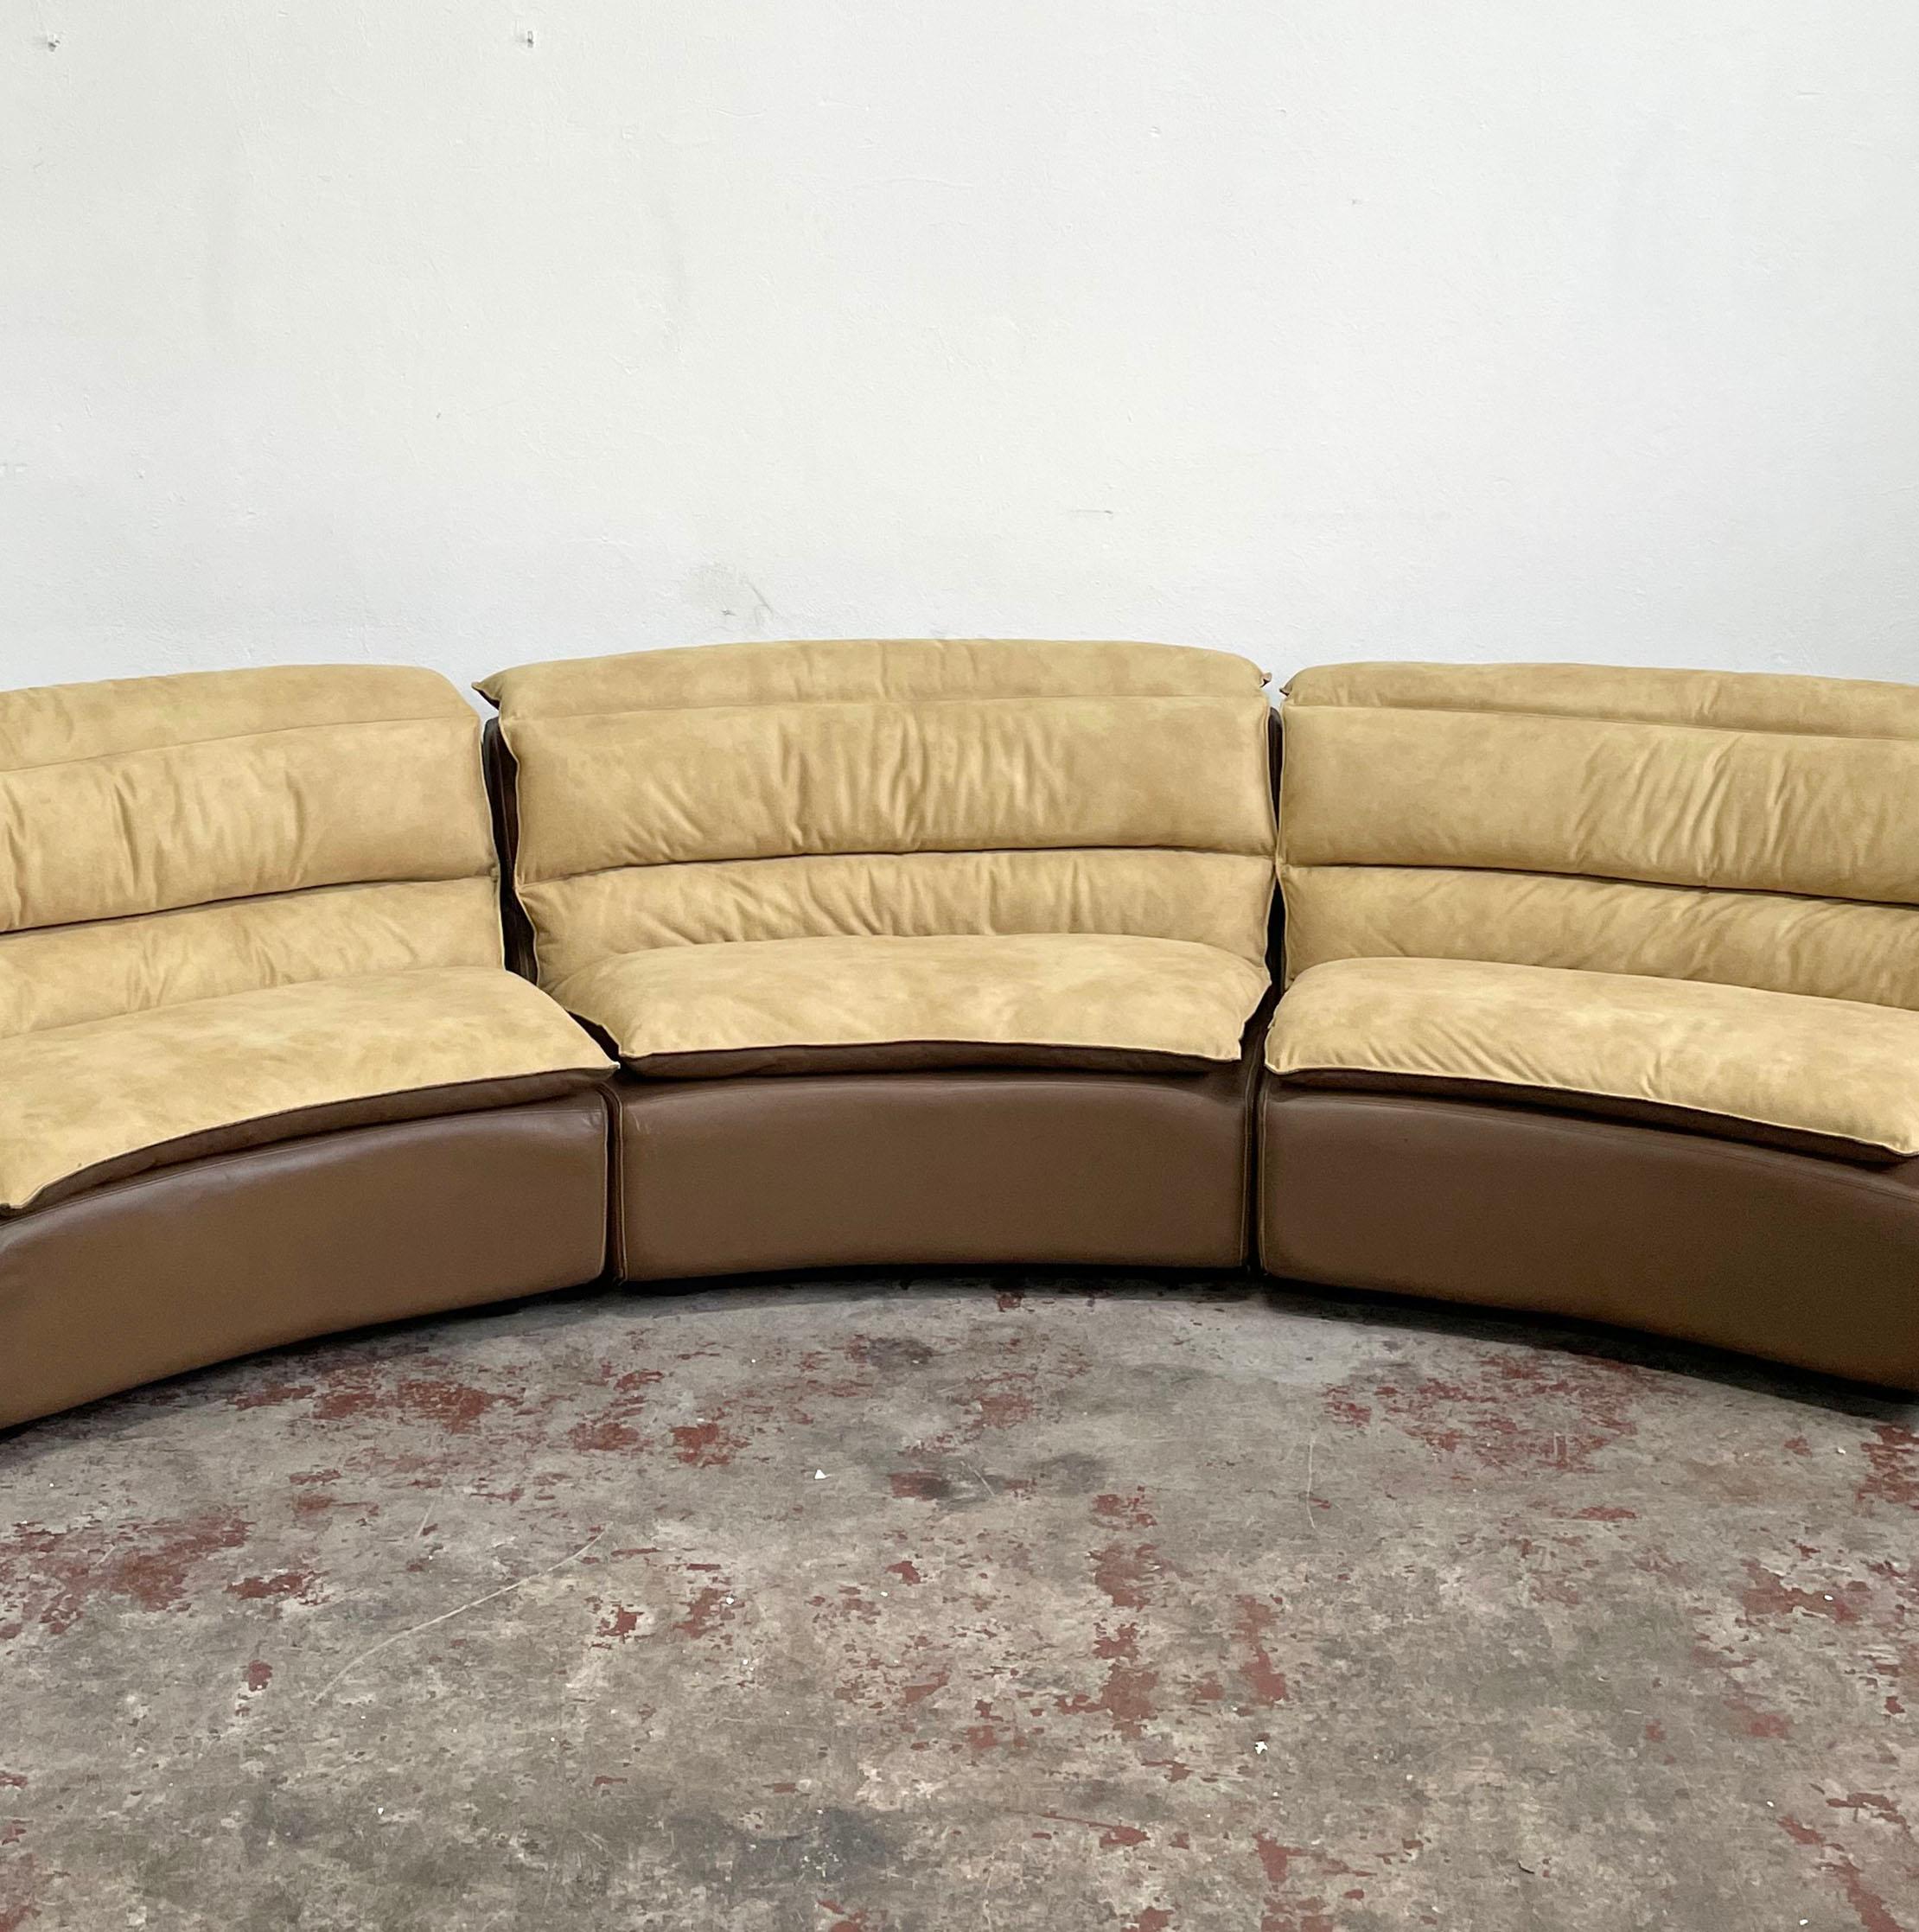 Modular semi-circular sofa from the 1970s/1980s in great original condition

Designed by Carlo Bartoli for Italian high-end furniture company Rossi di Albizzate

The sofa is composed of 4 modules, each measuring 123 cm in width, 80 cm in height,